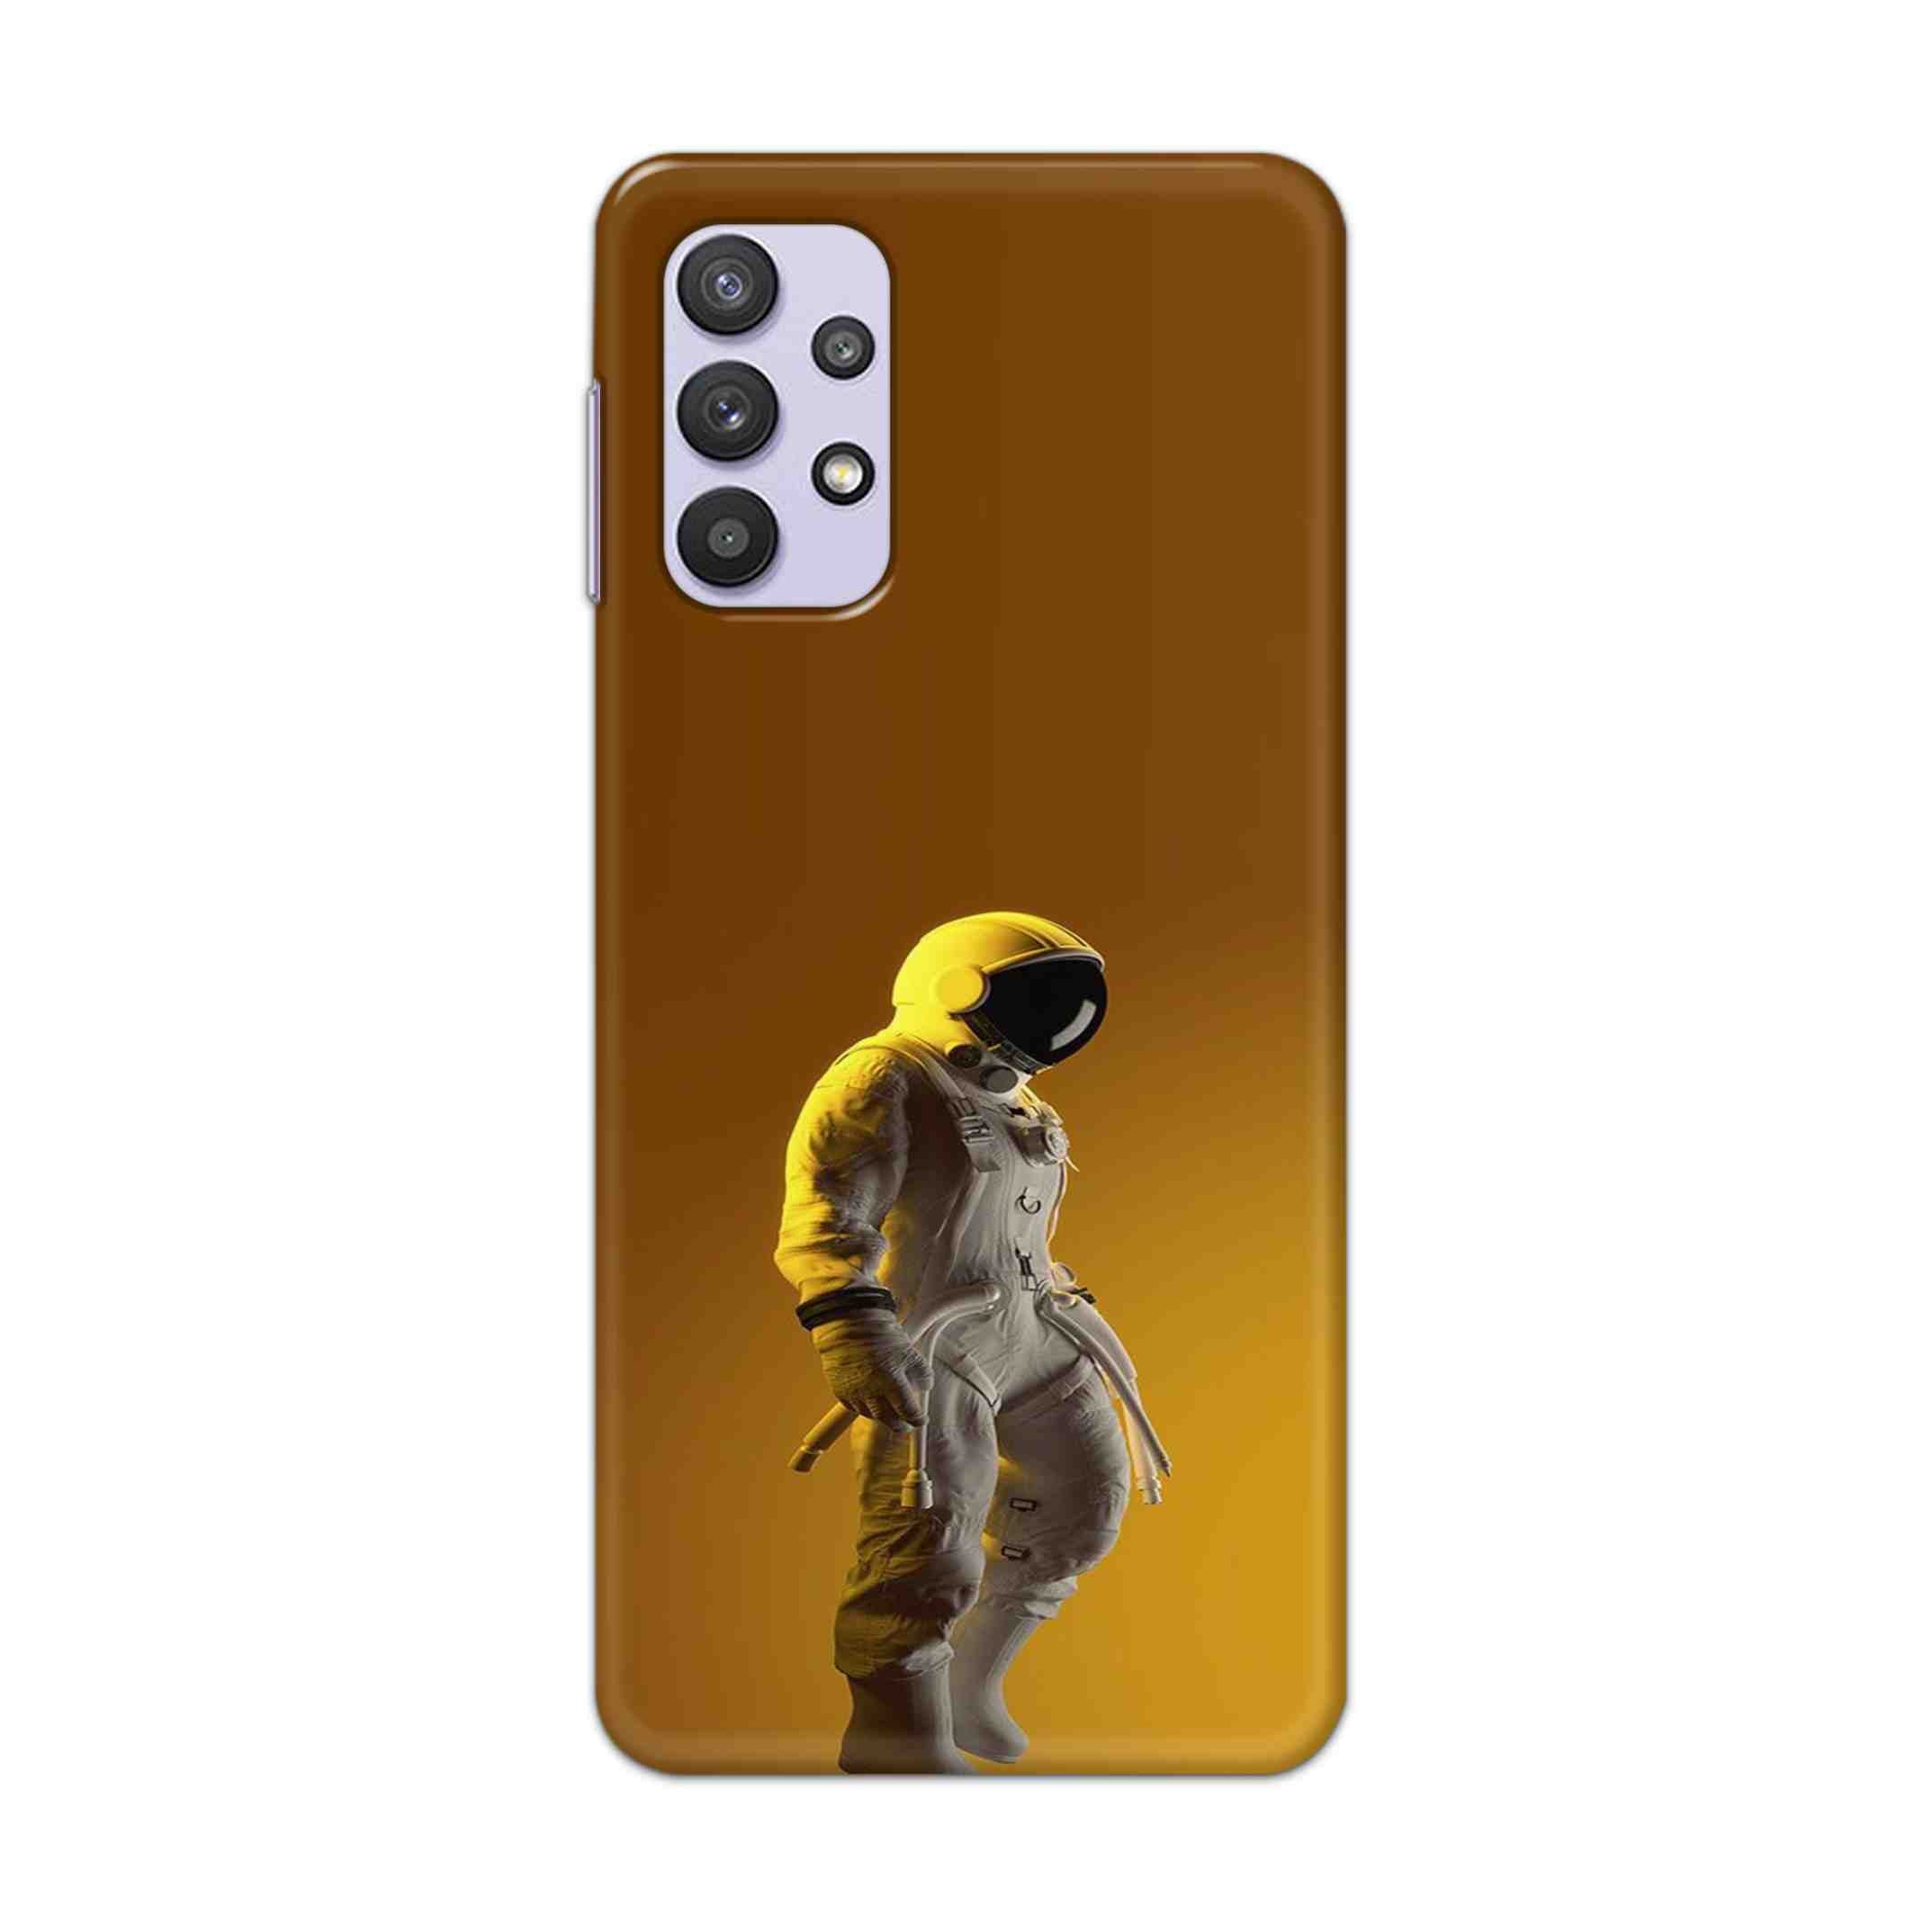 Buy Yellow Astronaut Hard Back Mobile Phone Case Cover For Samsung A32 5G Online